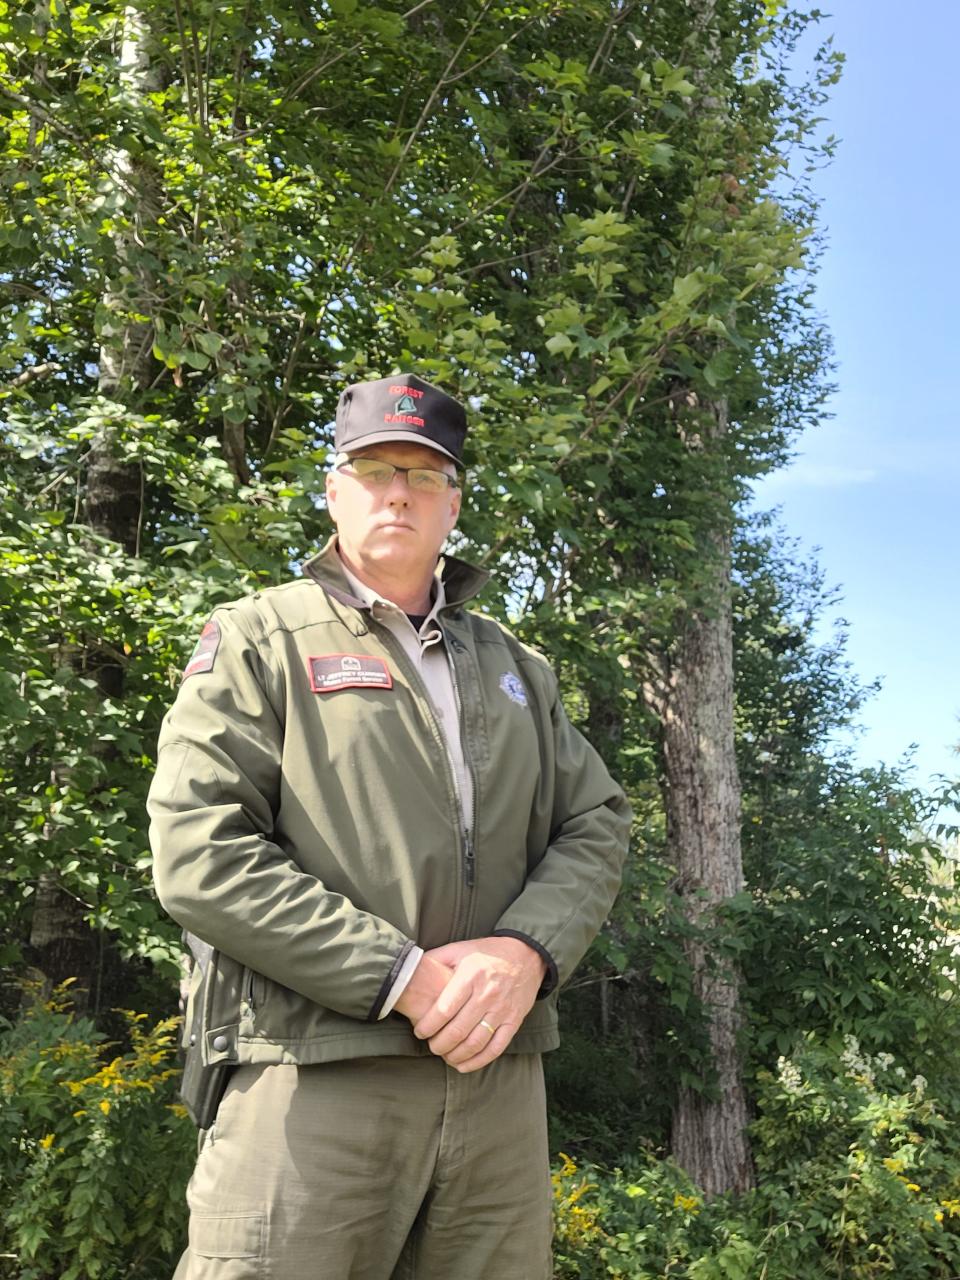 Jeff Currier is a regional forest ranger for the Maine Forest Service. He sees several conflating factors – like climate change and degradation of volunteer fire departments – as concerns for Maine's wildfire risk.